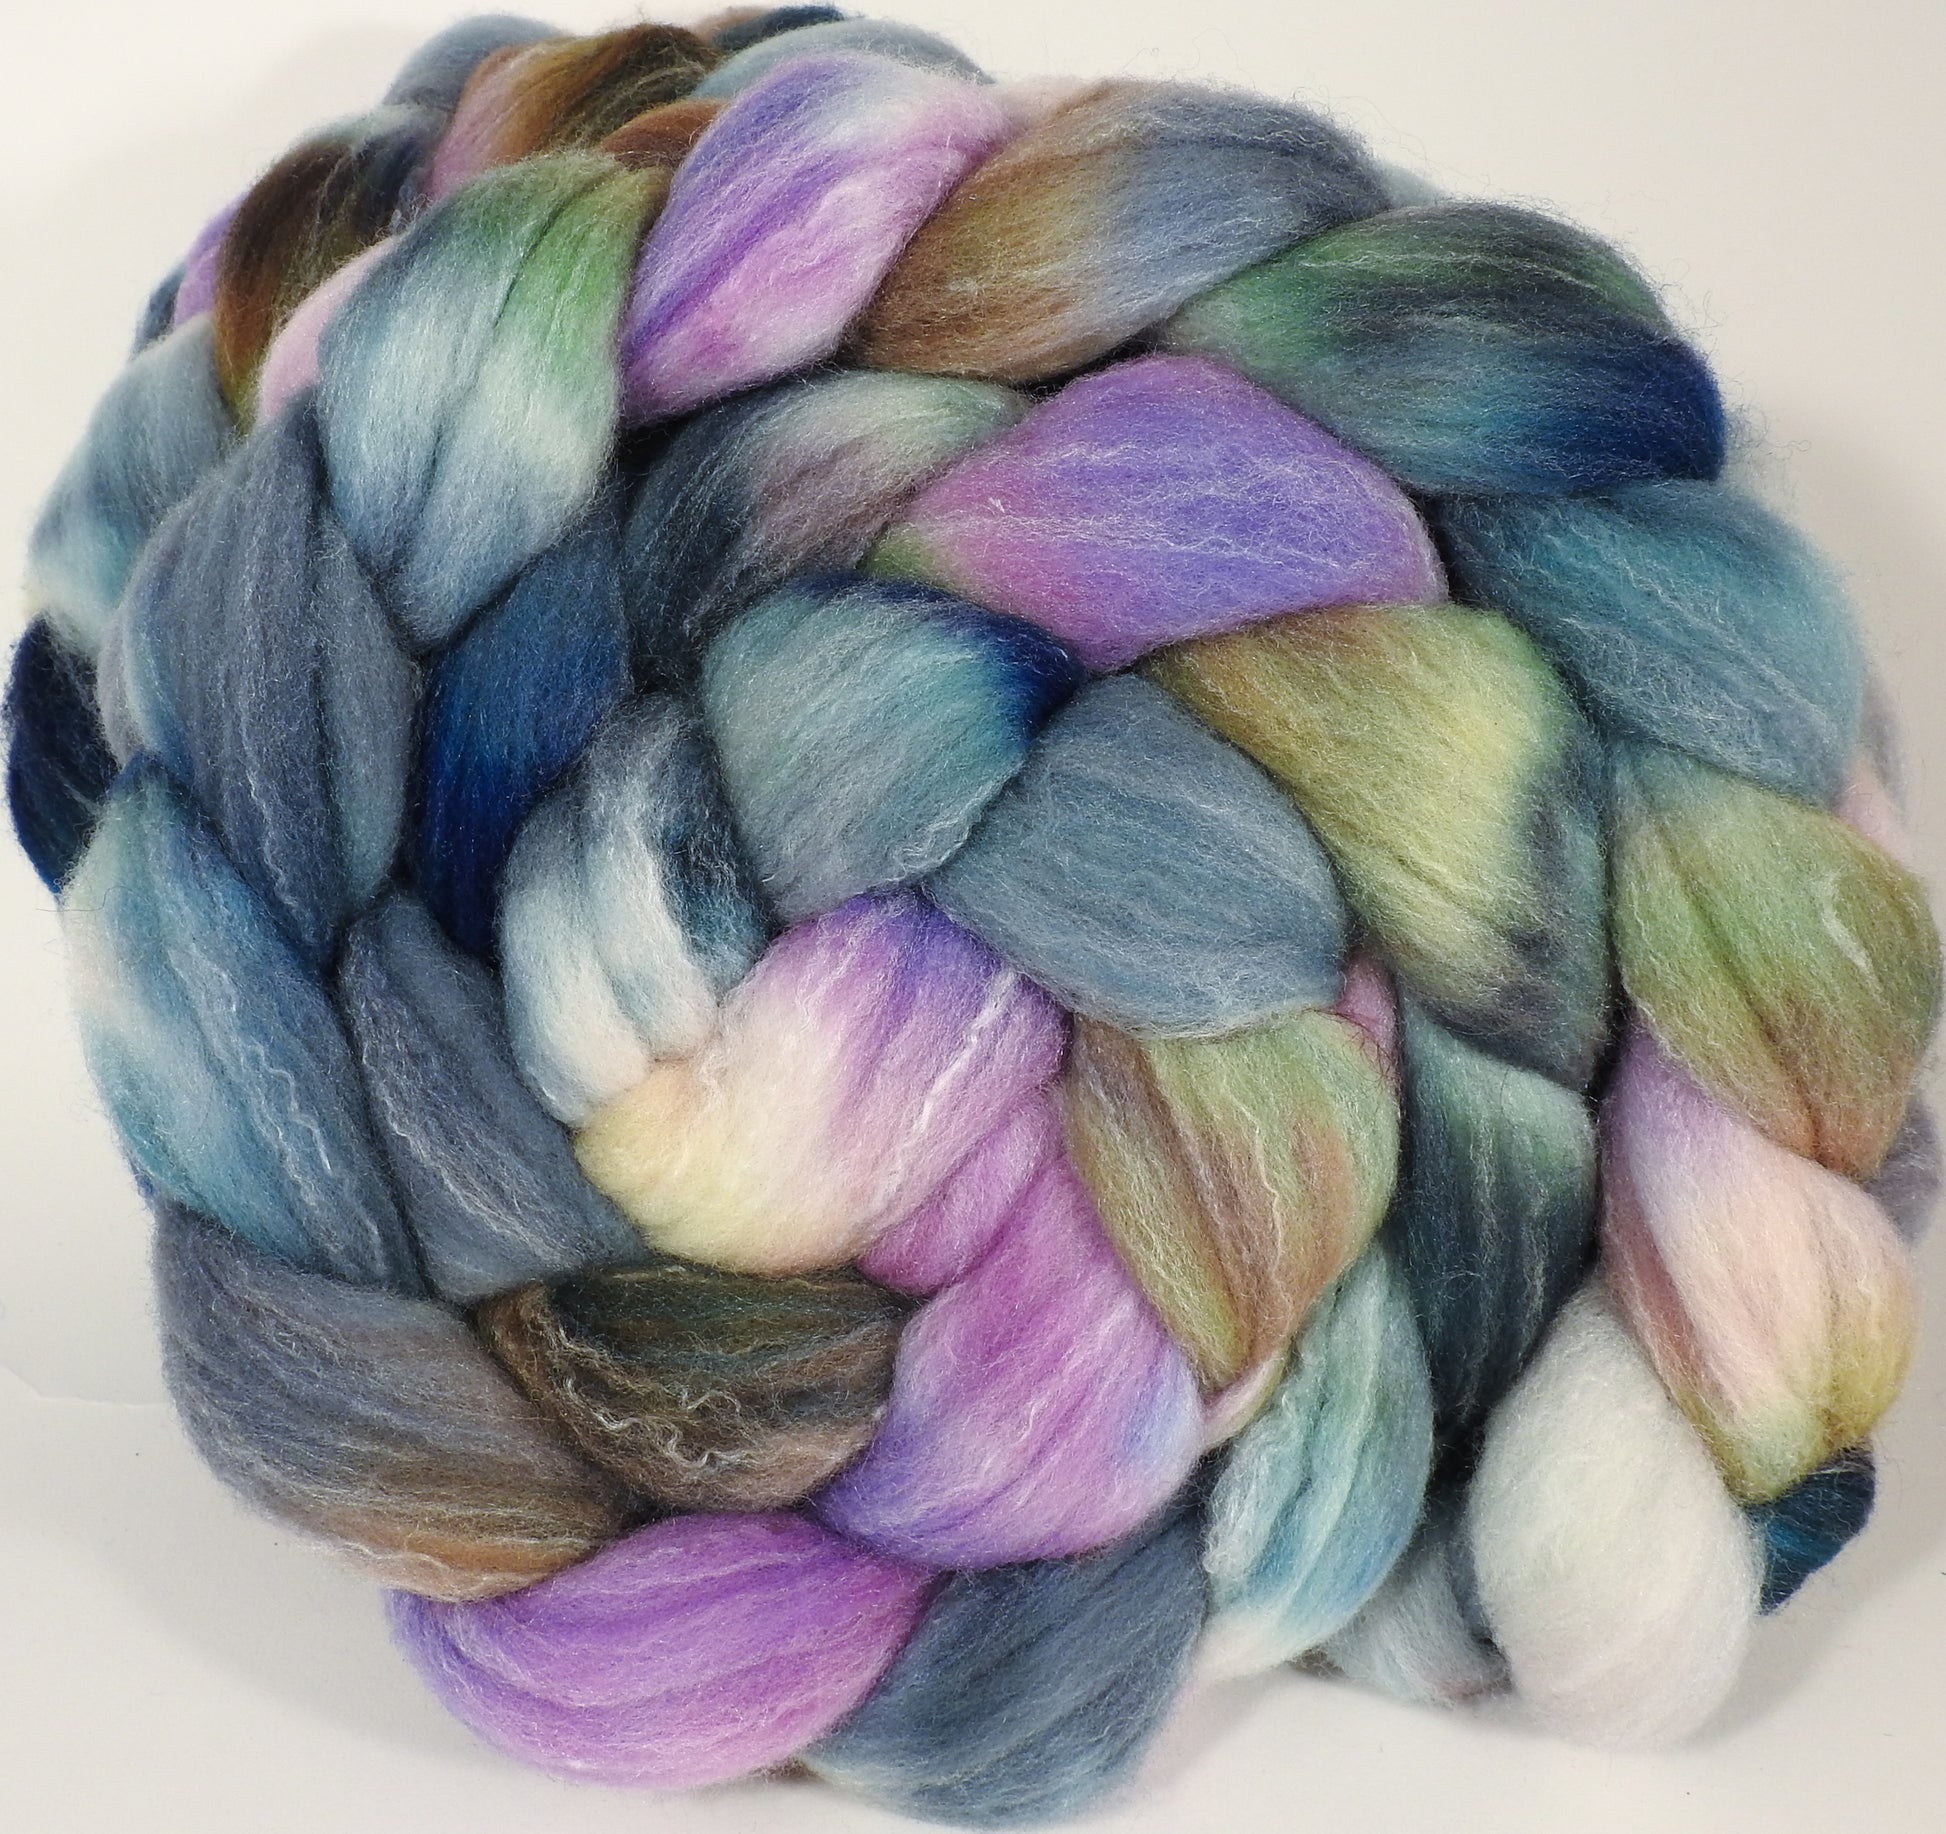 Hand dyed top for spinning -Oysters (5.4 oz.) Targhee/silk/ bamboo ( 80/10/10) - Inglenook Fibers